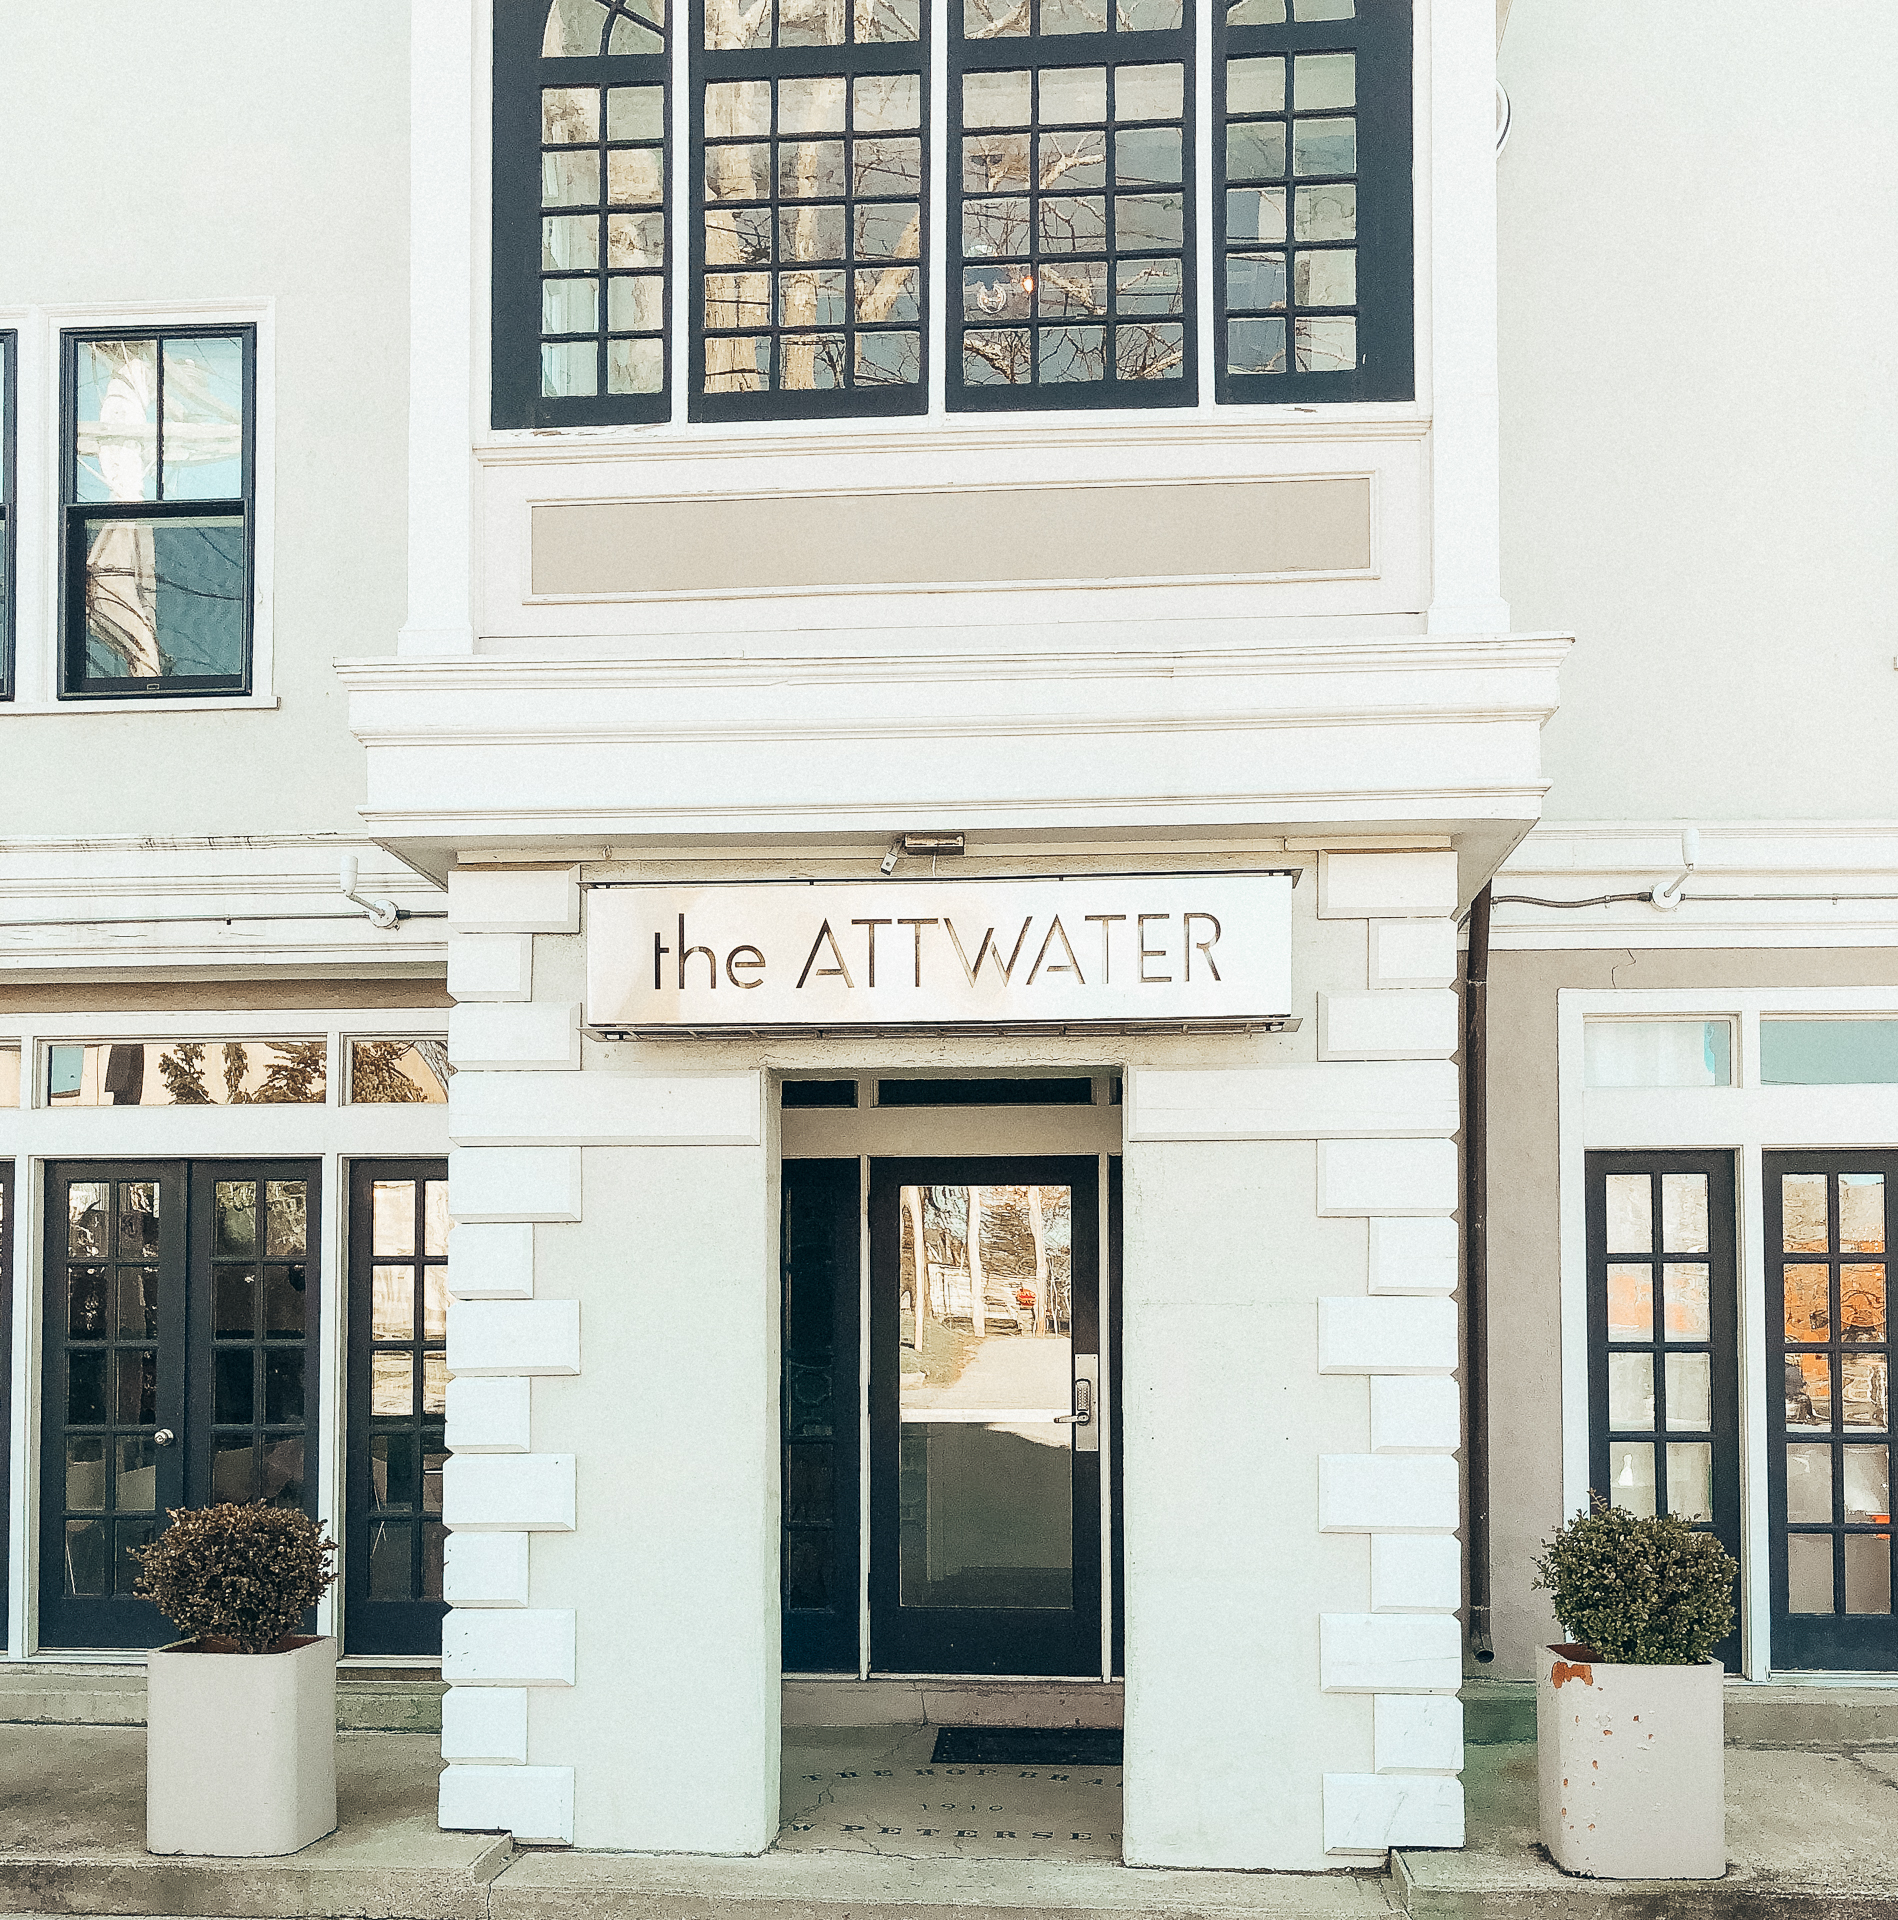 Stay at The Attwater Hotel: A Hotel Review - Shannon Shipman